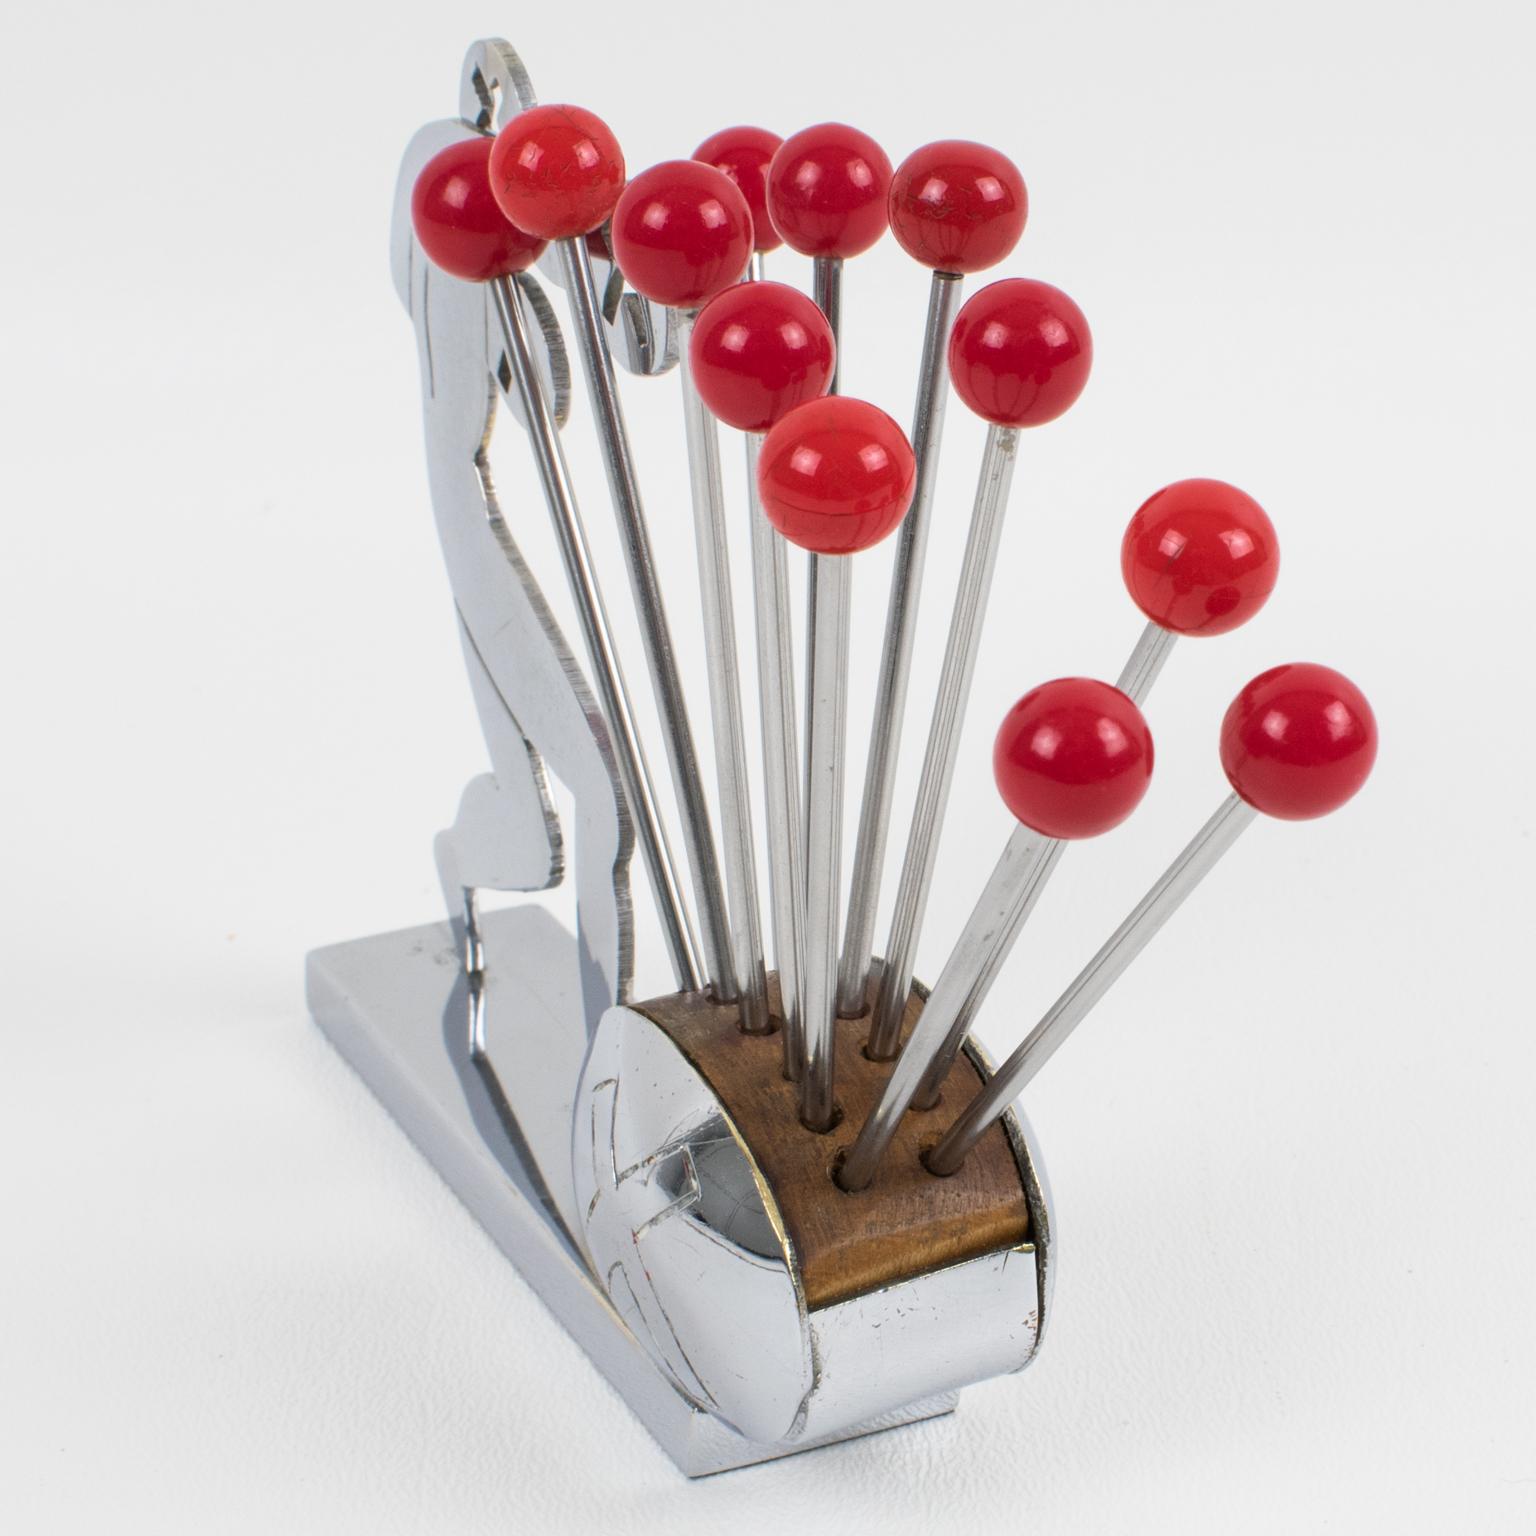 Stunning barware bar set cocktail picks. This wonderful French Art Deco bar set is made of wood and chromed metal and features a fighting boxer with 12 metal cocktail picks with red hard plastic bead finial. This set is very stylish, a great